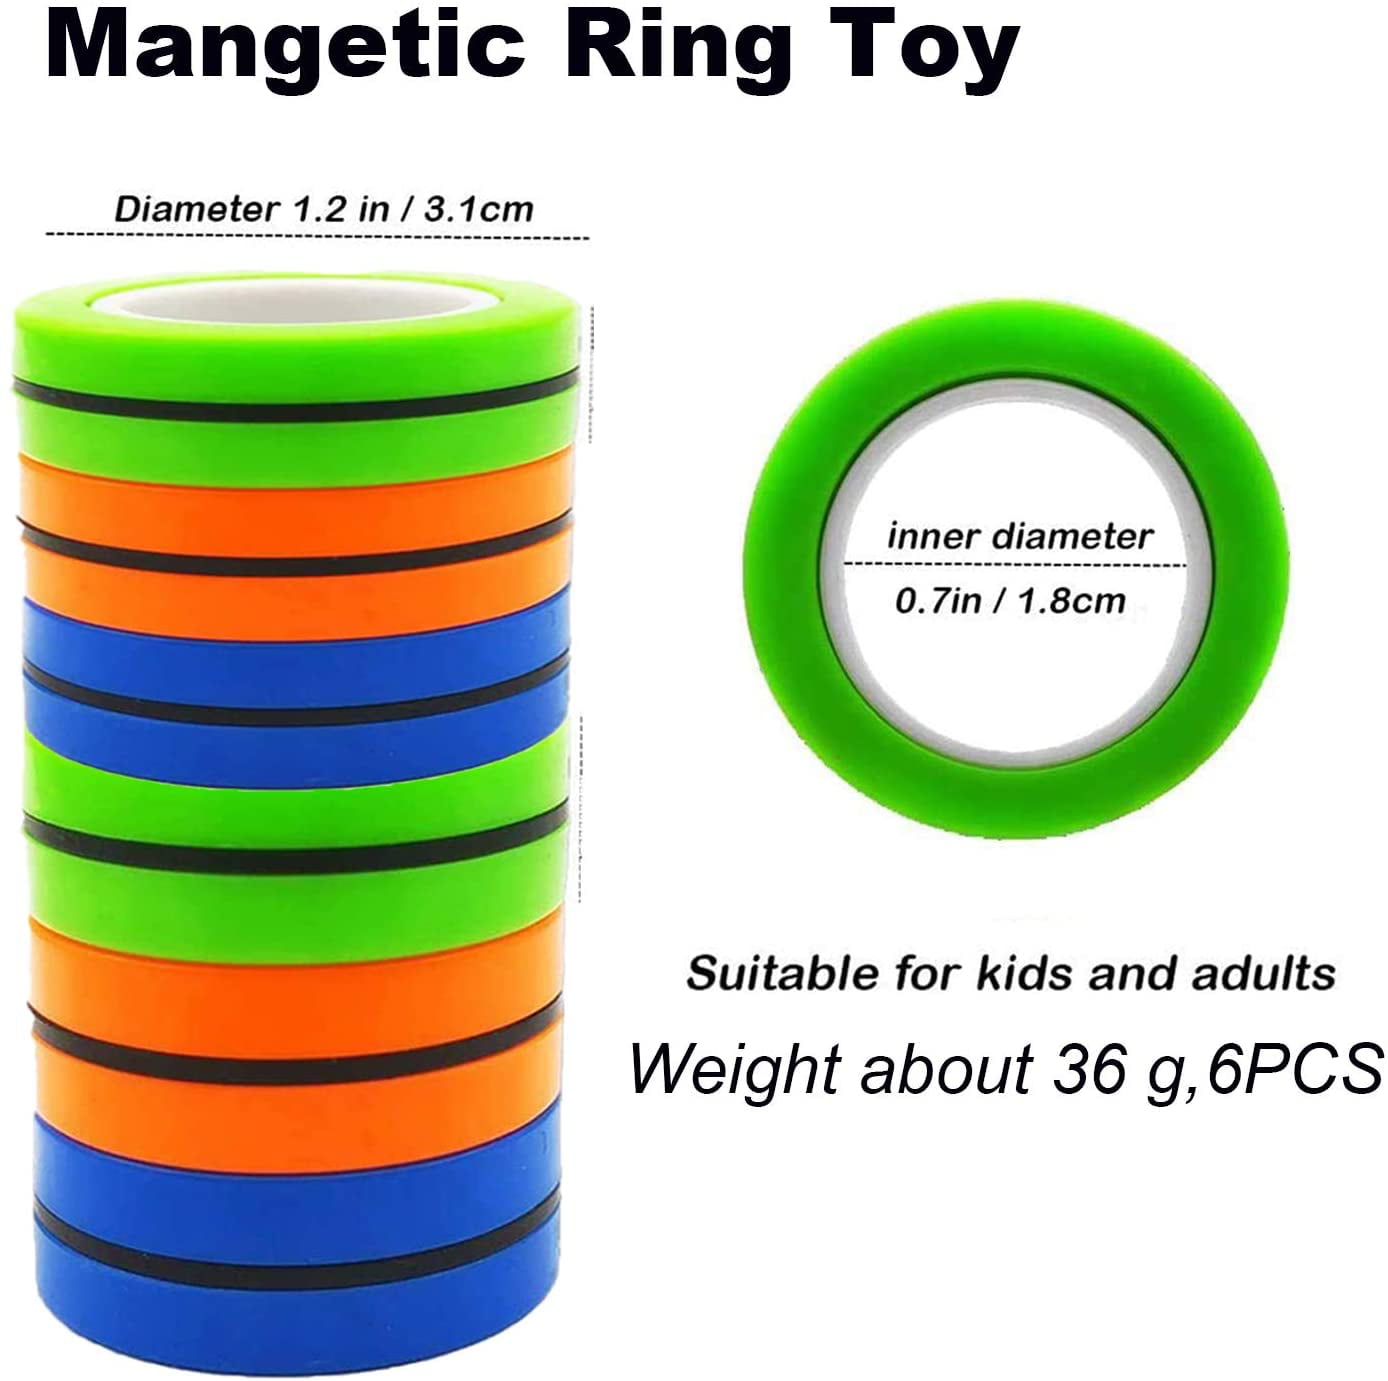 6PCS Magnetic Rings Fidget Toys, Roller Rings, Adult Finger Fidget Toys,  ADHD Anxiety Relief Decompression Magical Ring Fidget Toy,Funny Gifts Kids